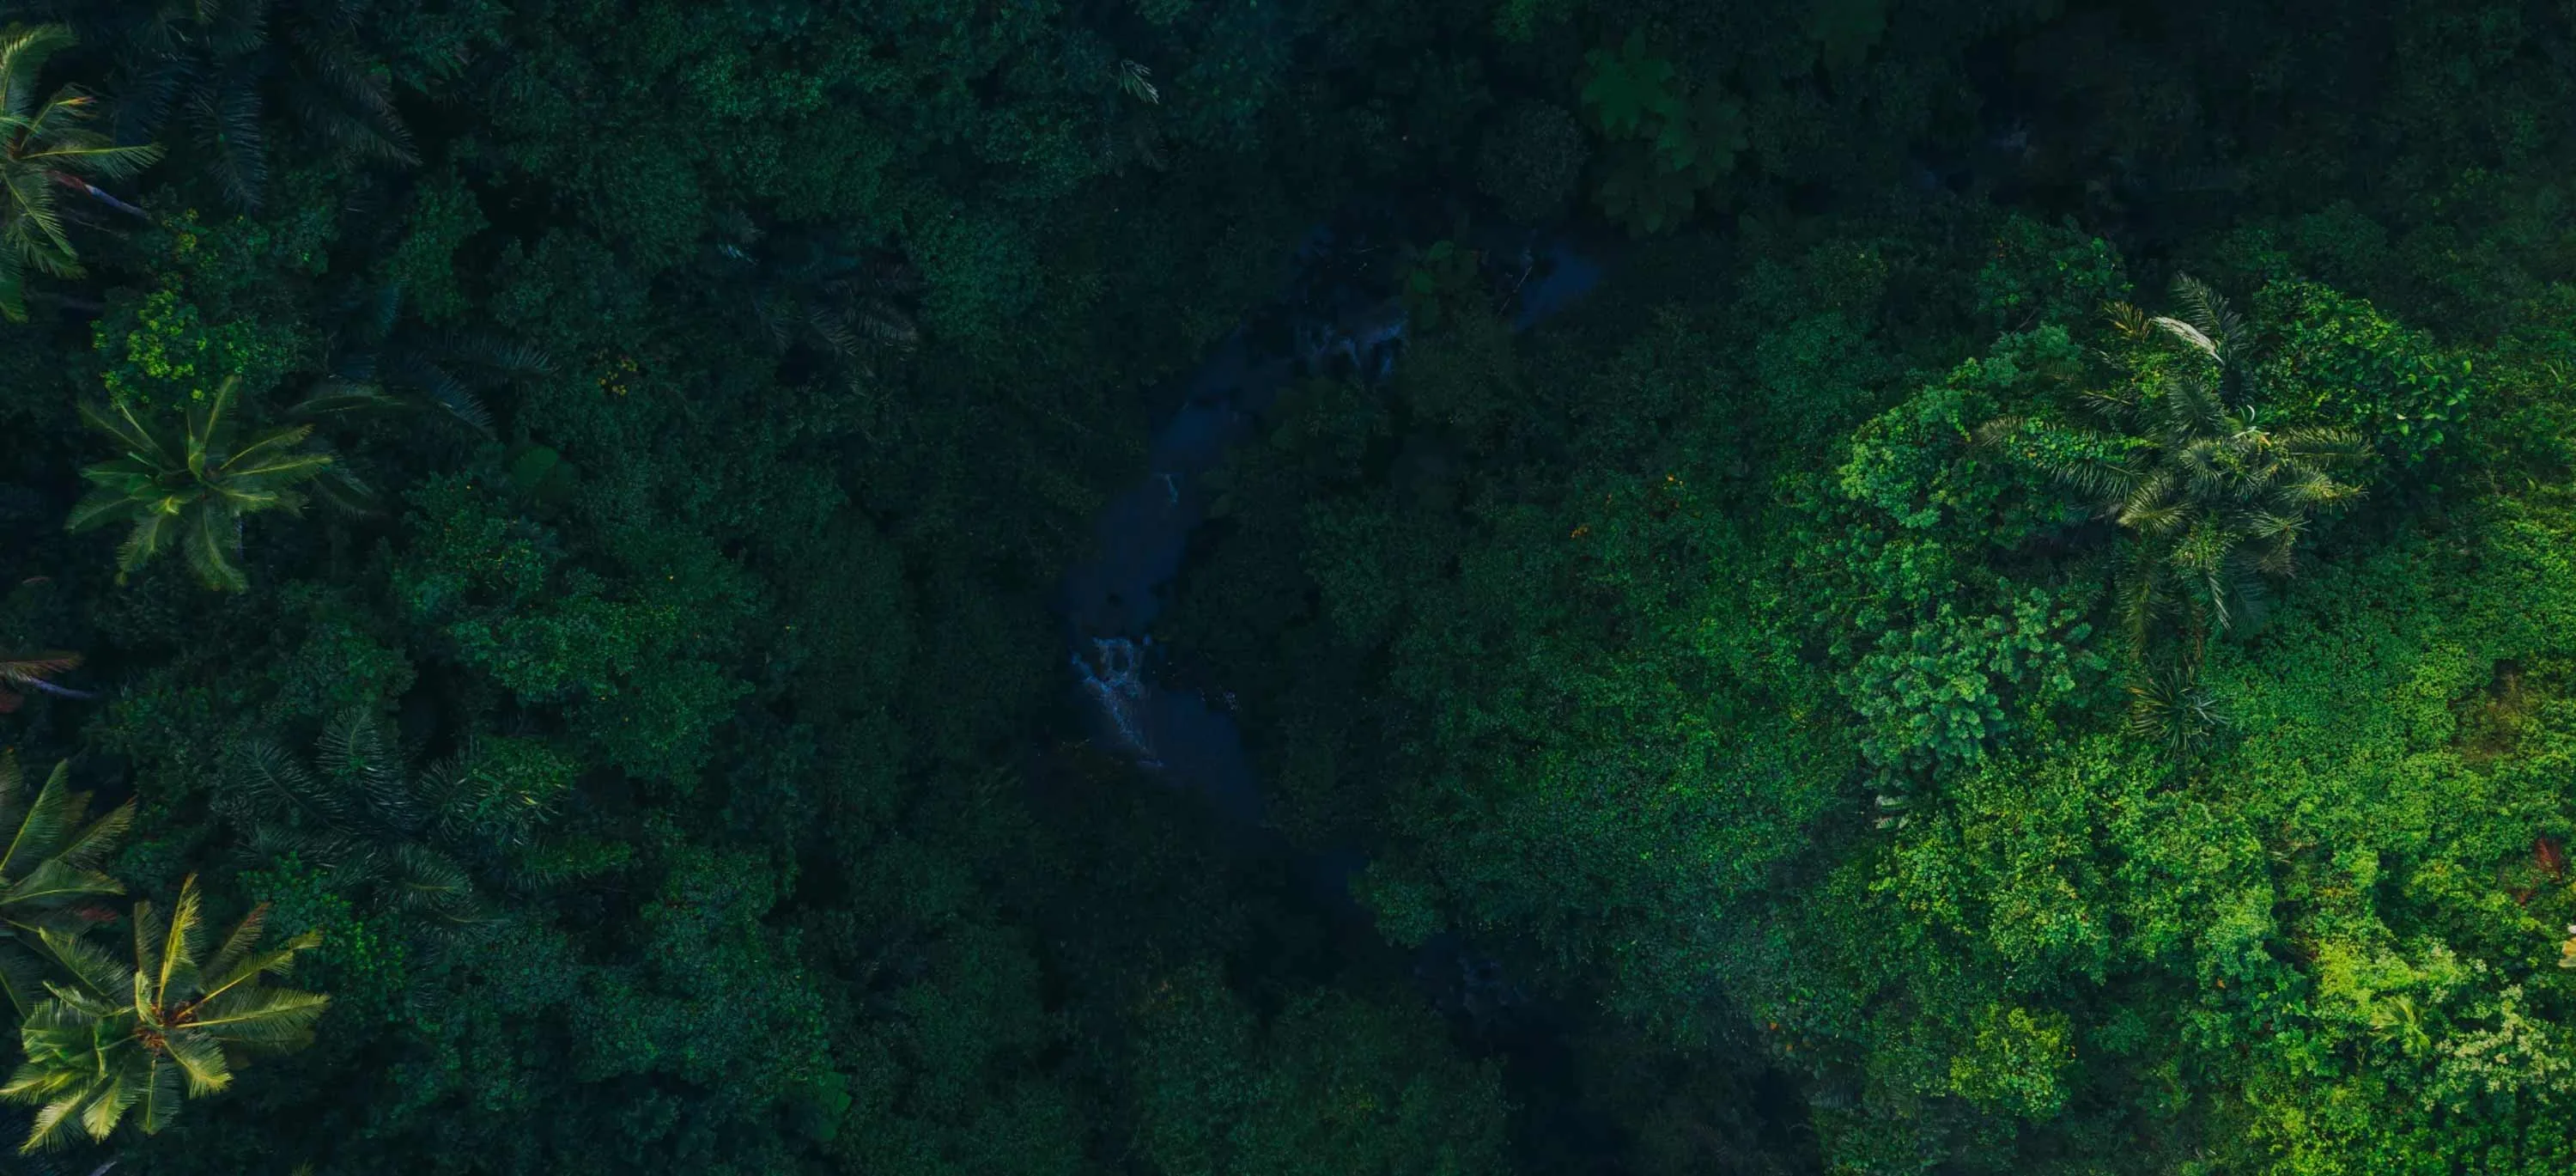 Arial image of a forest